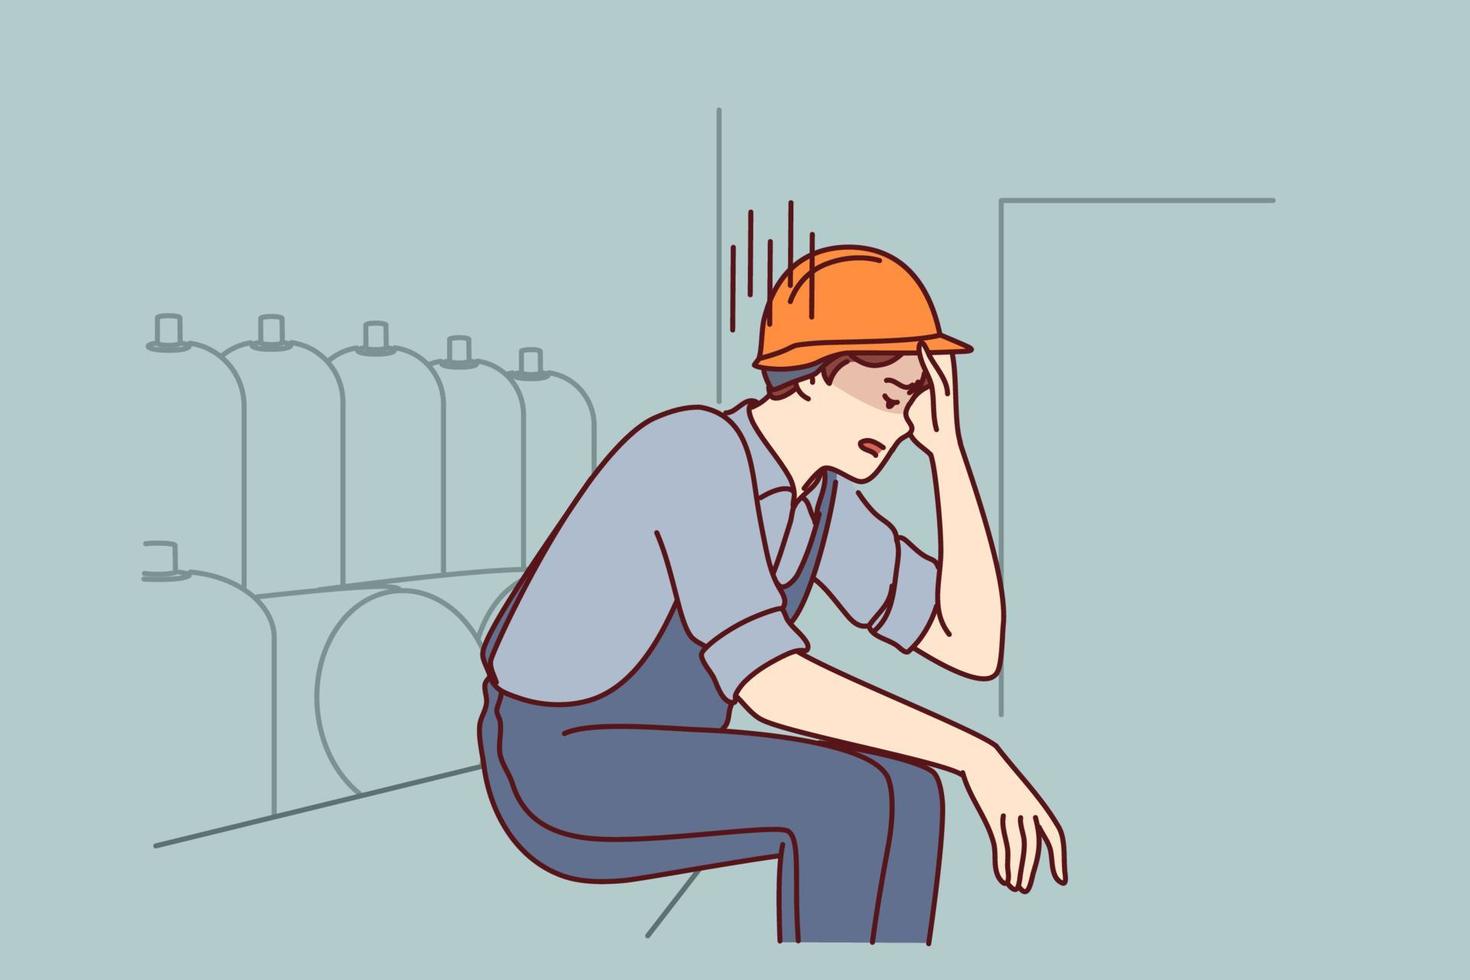 Tired man working in factory sits near production equipment holding head because of nervous job. Nervous factory worker in safety helmet needs psychological support due to poor working conditions vector